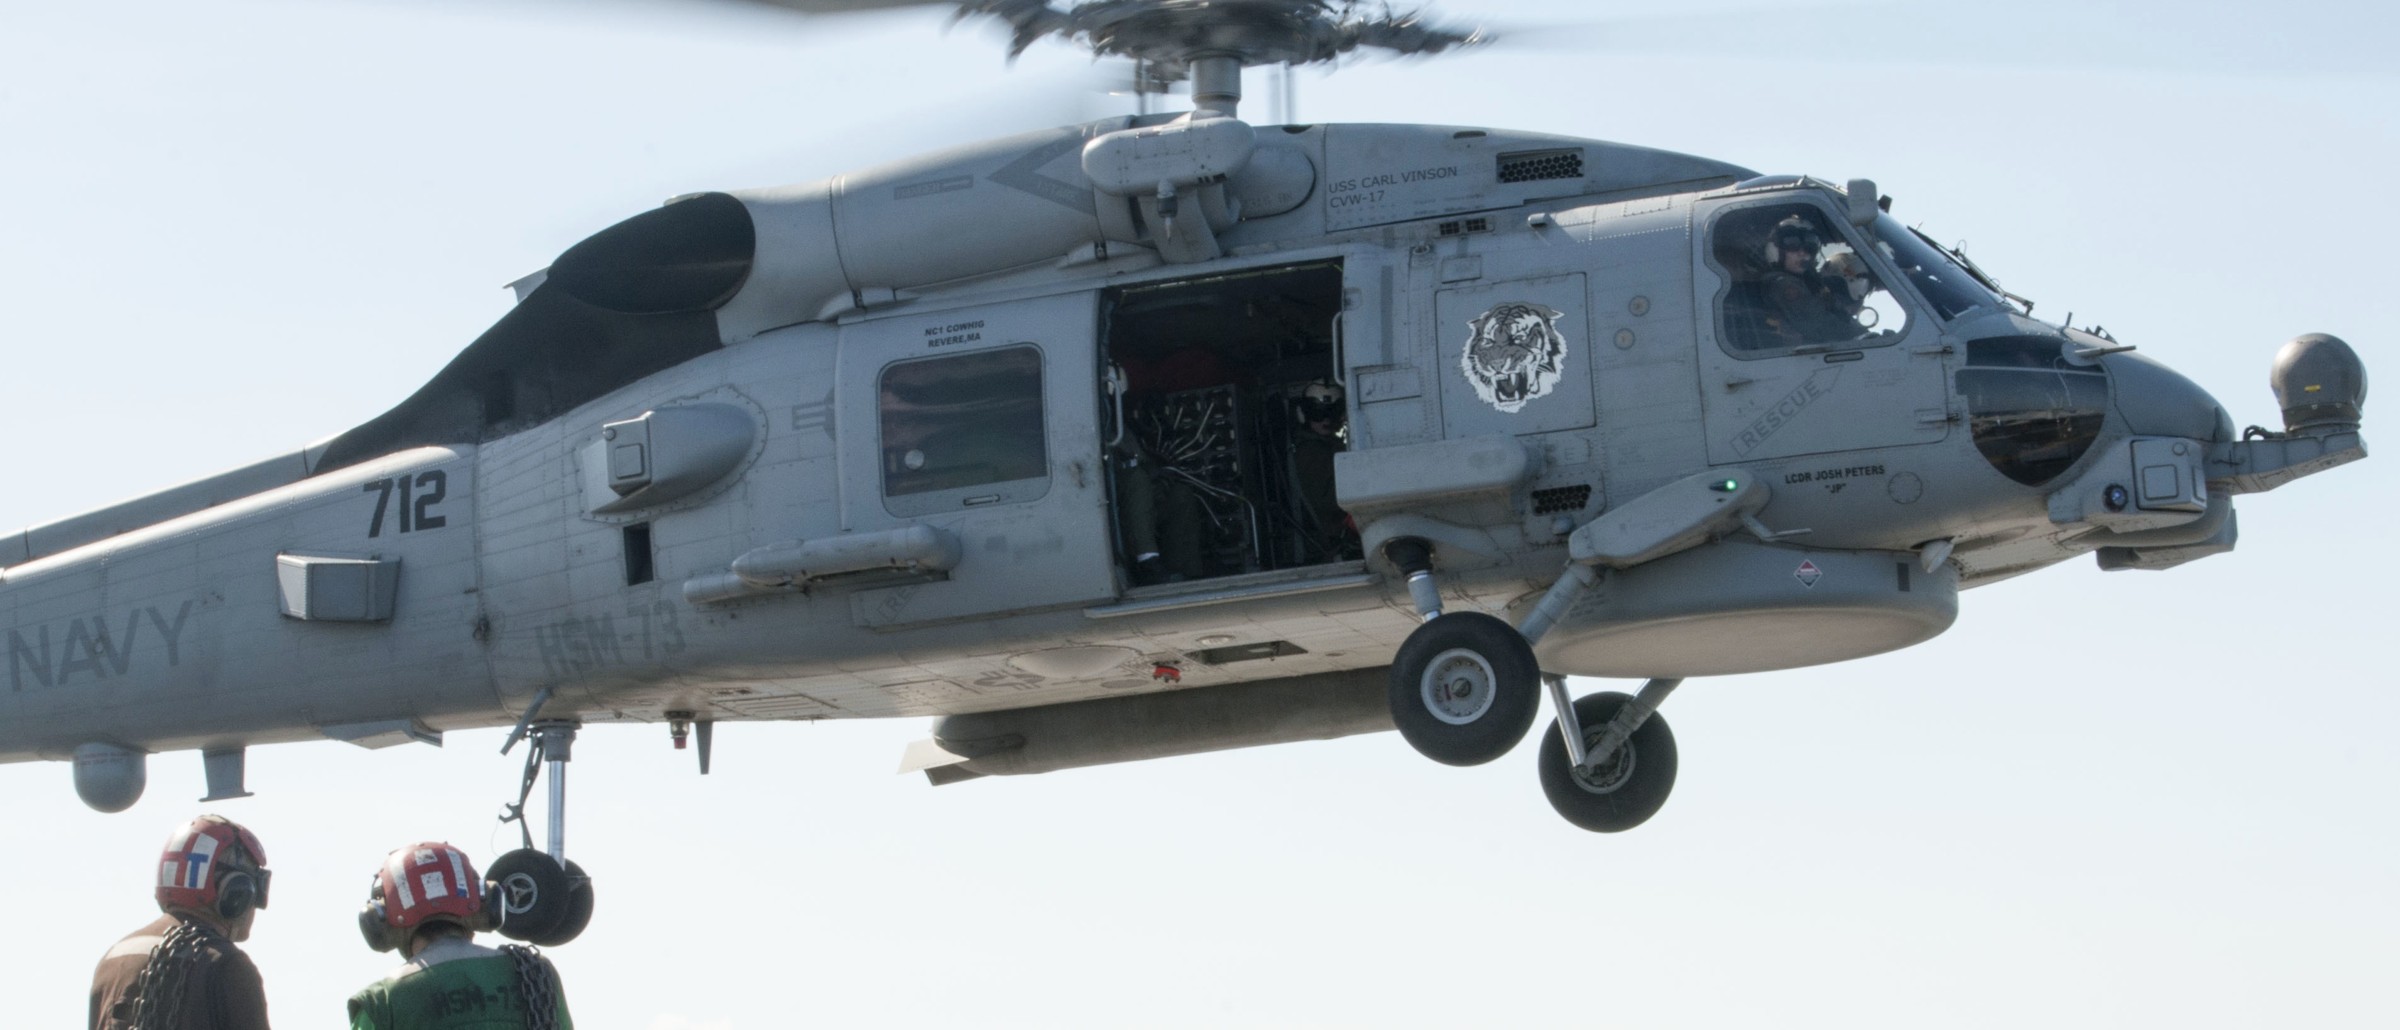 hsm-73 battlecats helicopter maritime strike squadron us navy mh-60r seahawk 2015 48